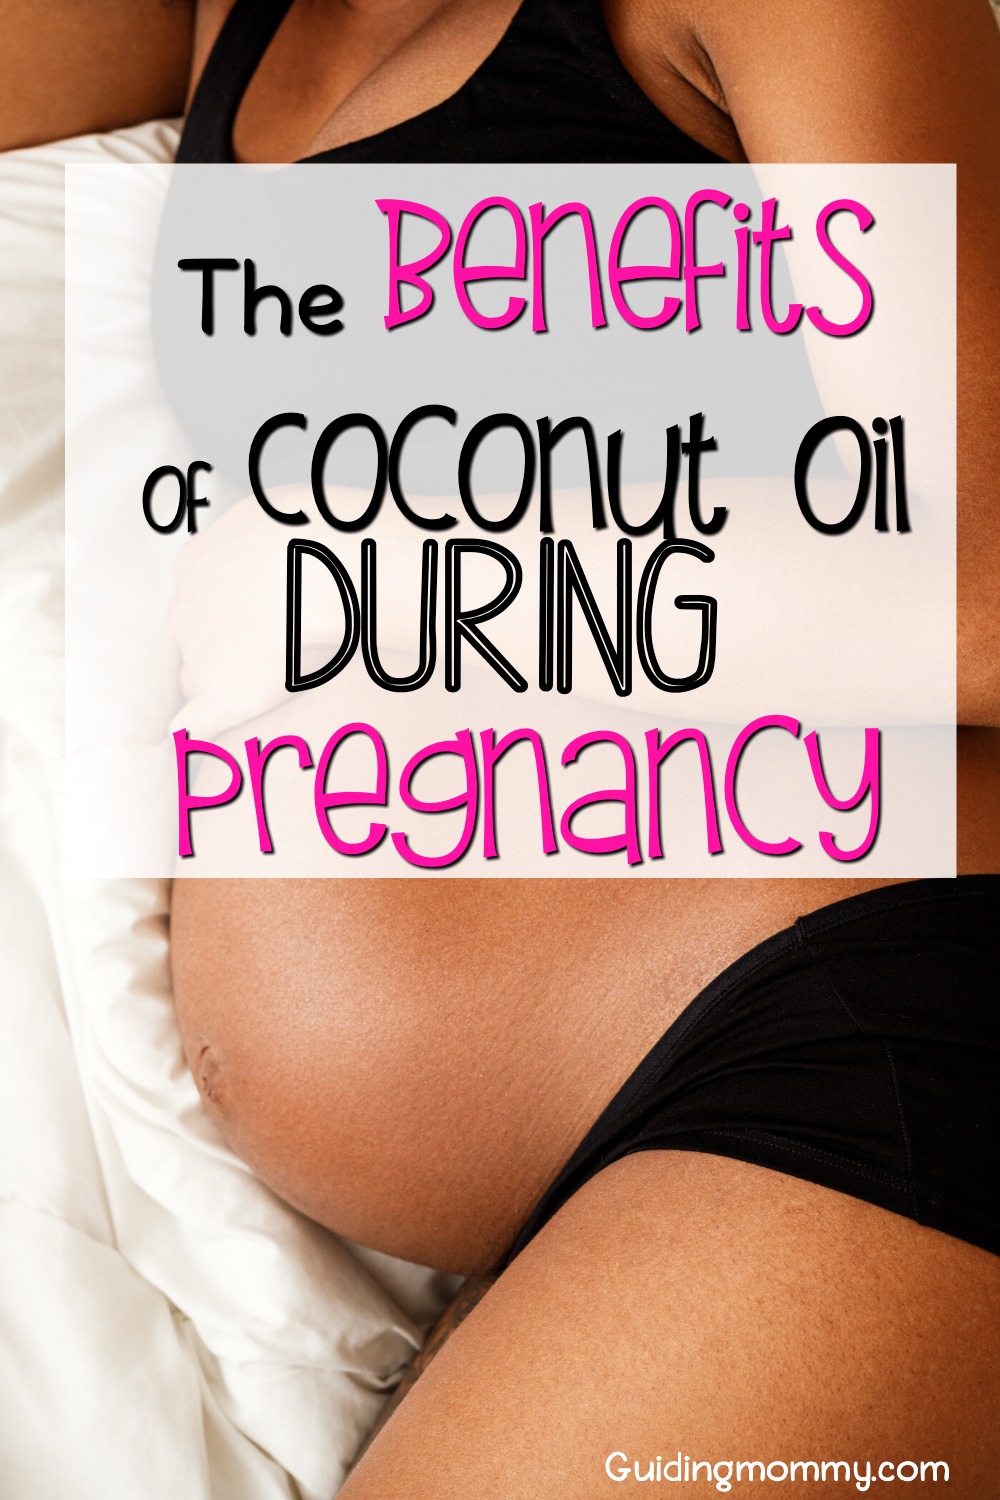 Benefits of Coconut Oil during pregnancy